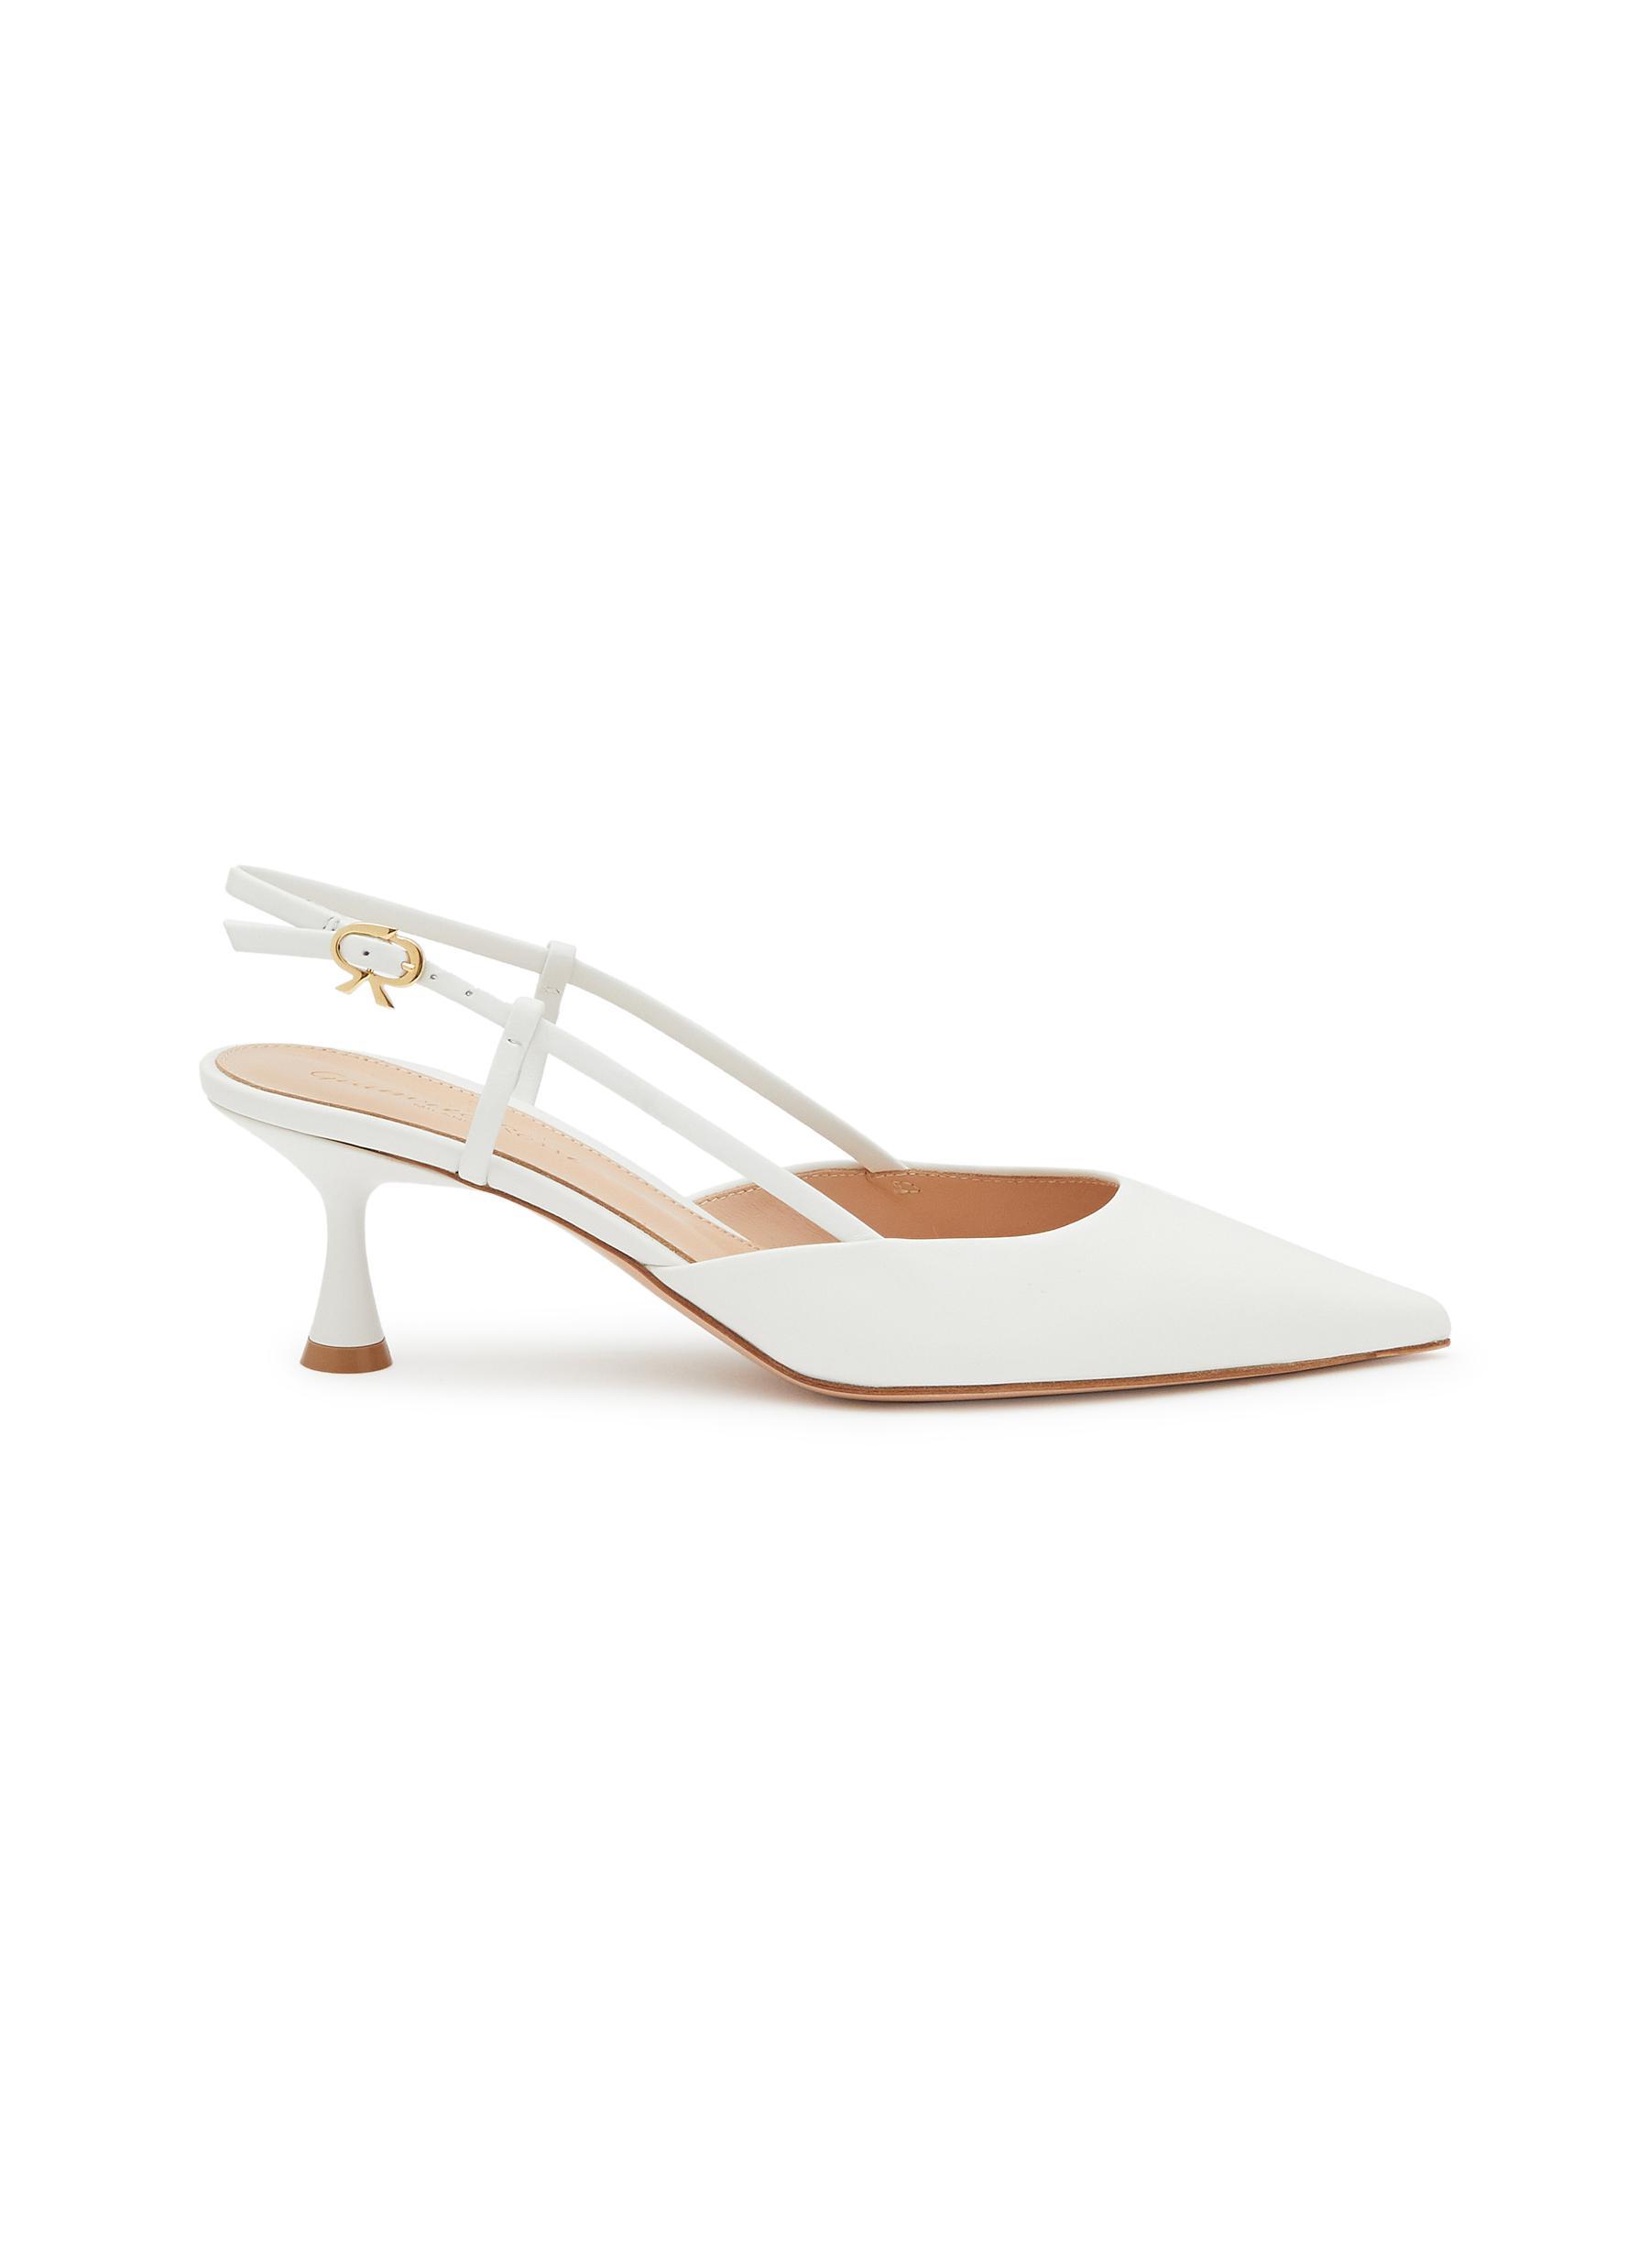 Gianvito Rossi 'ascent' 55 Calf Leather Slingback Pumps in White | Lyst